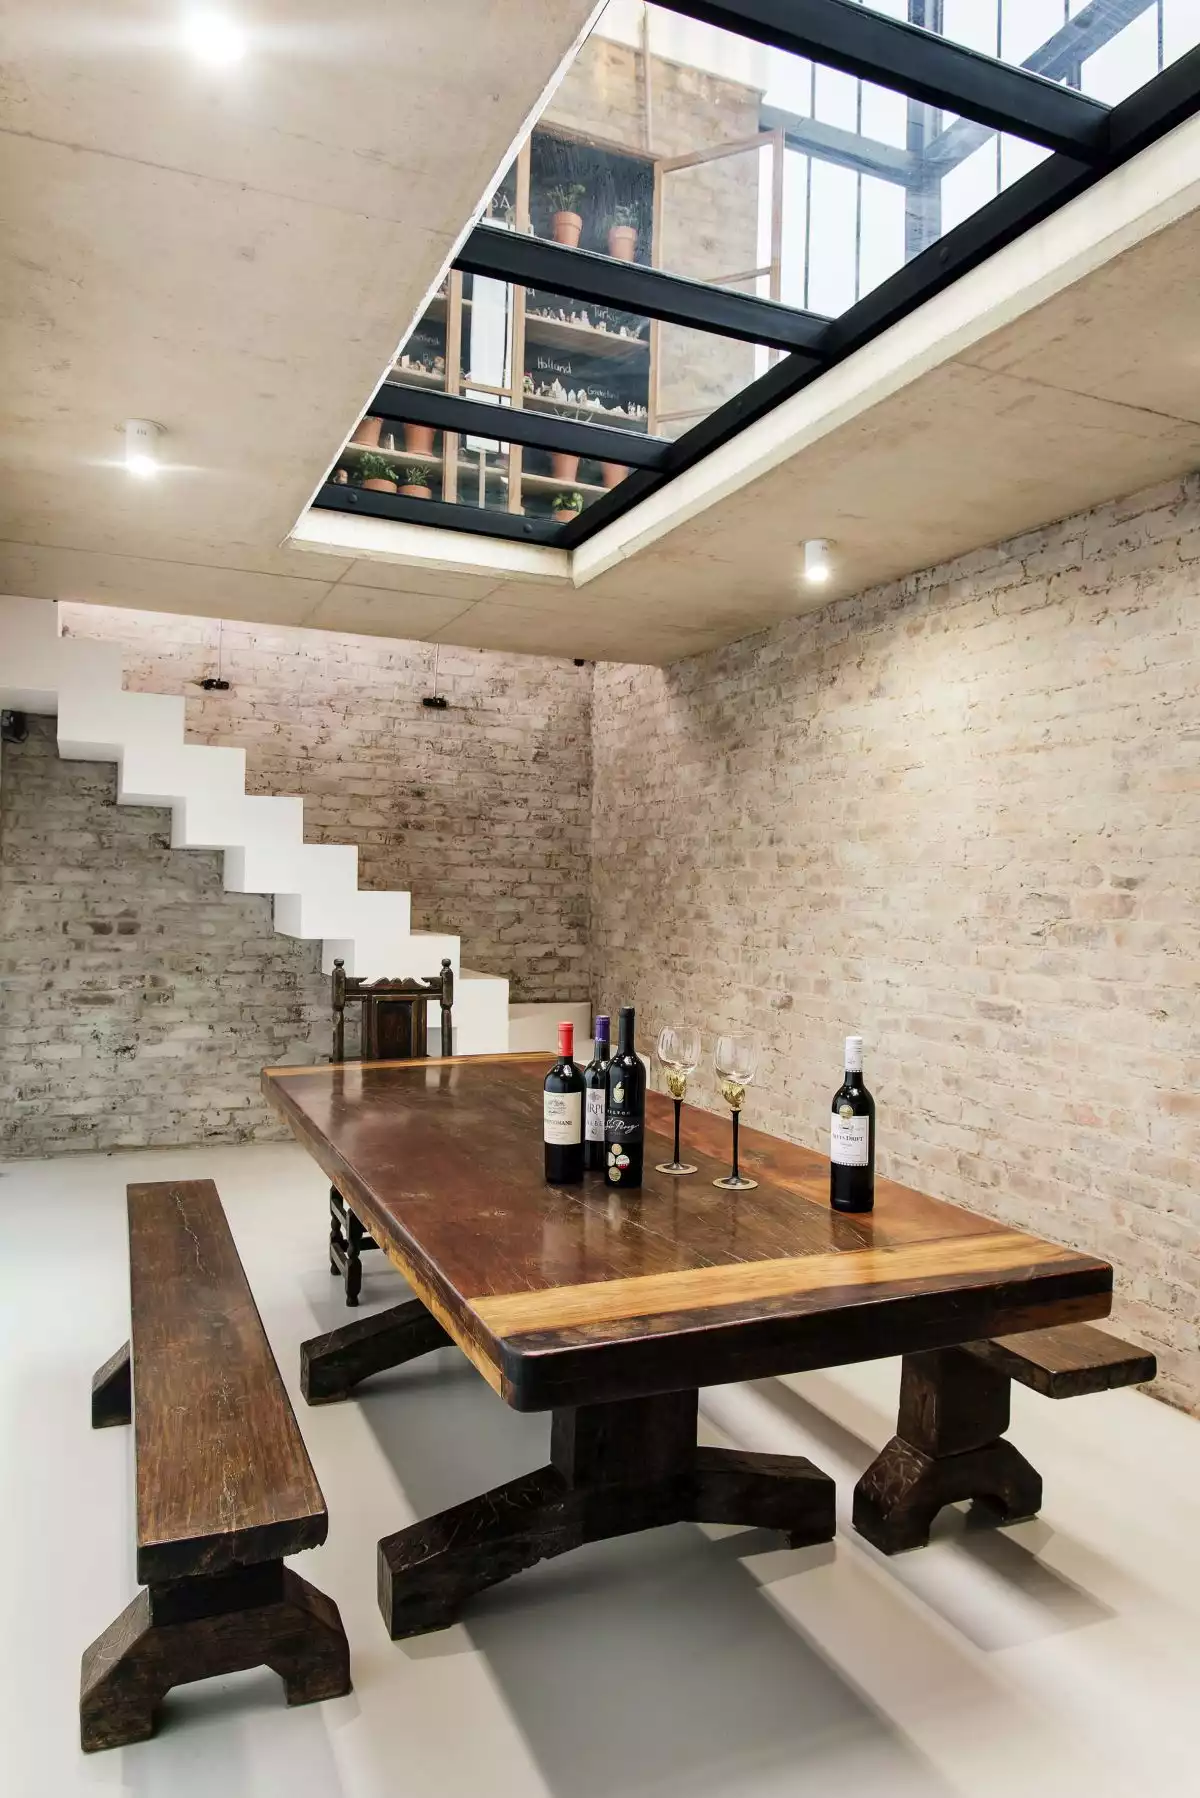 A secret staircase in the kitchen offers access to the underground wine cellar and a glass floor panel connects the two levels